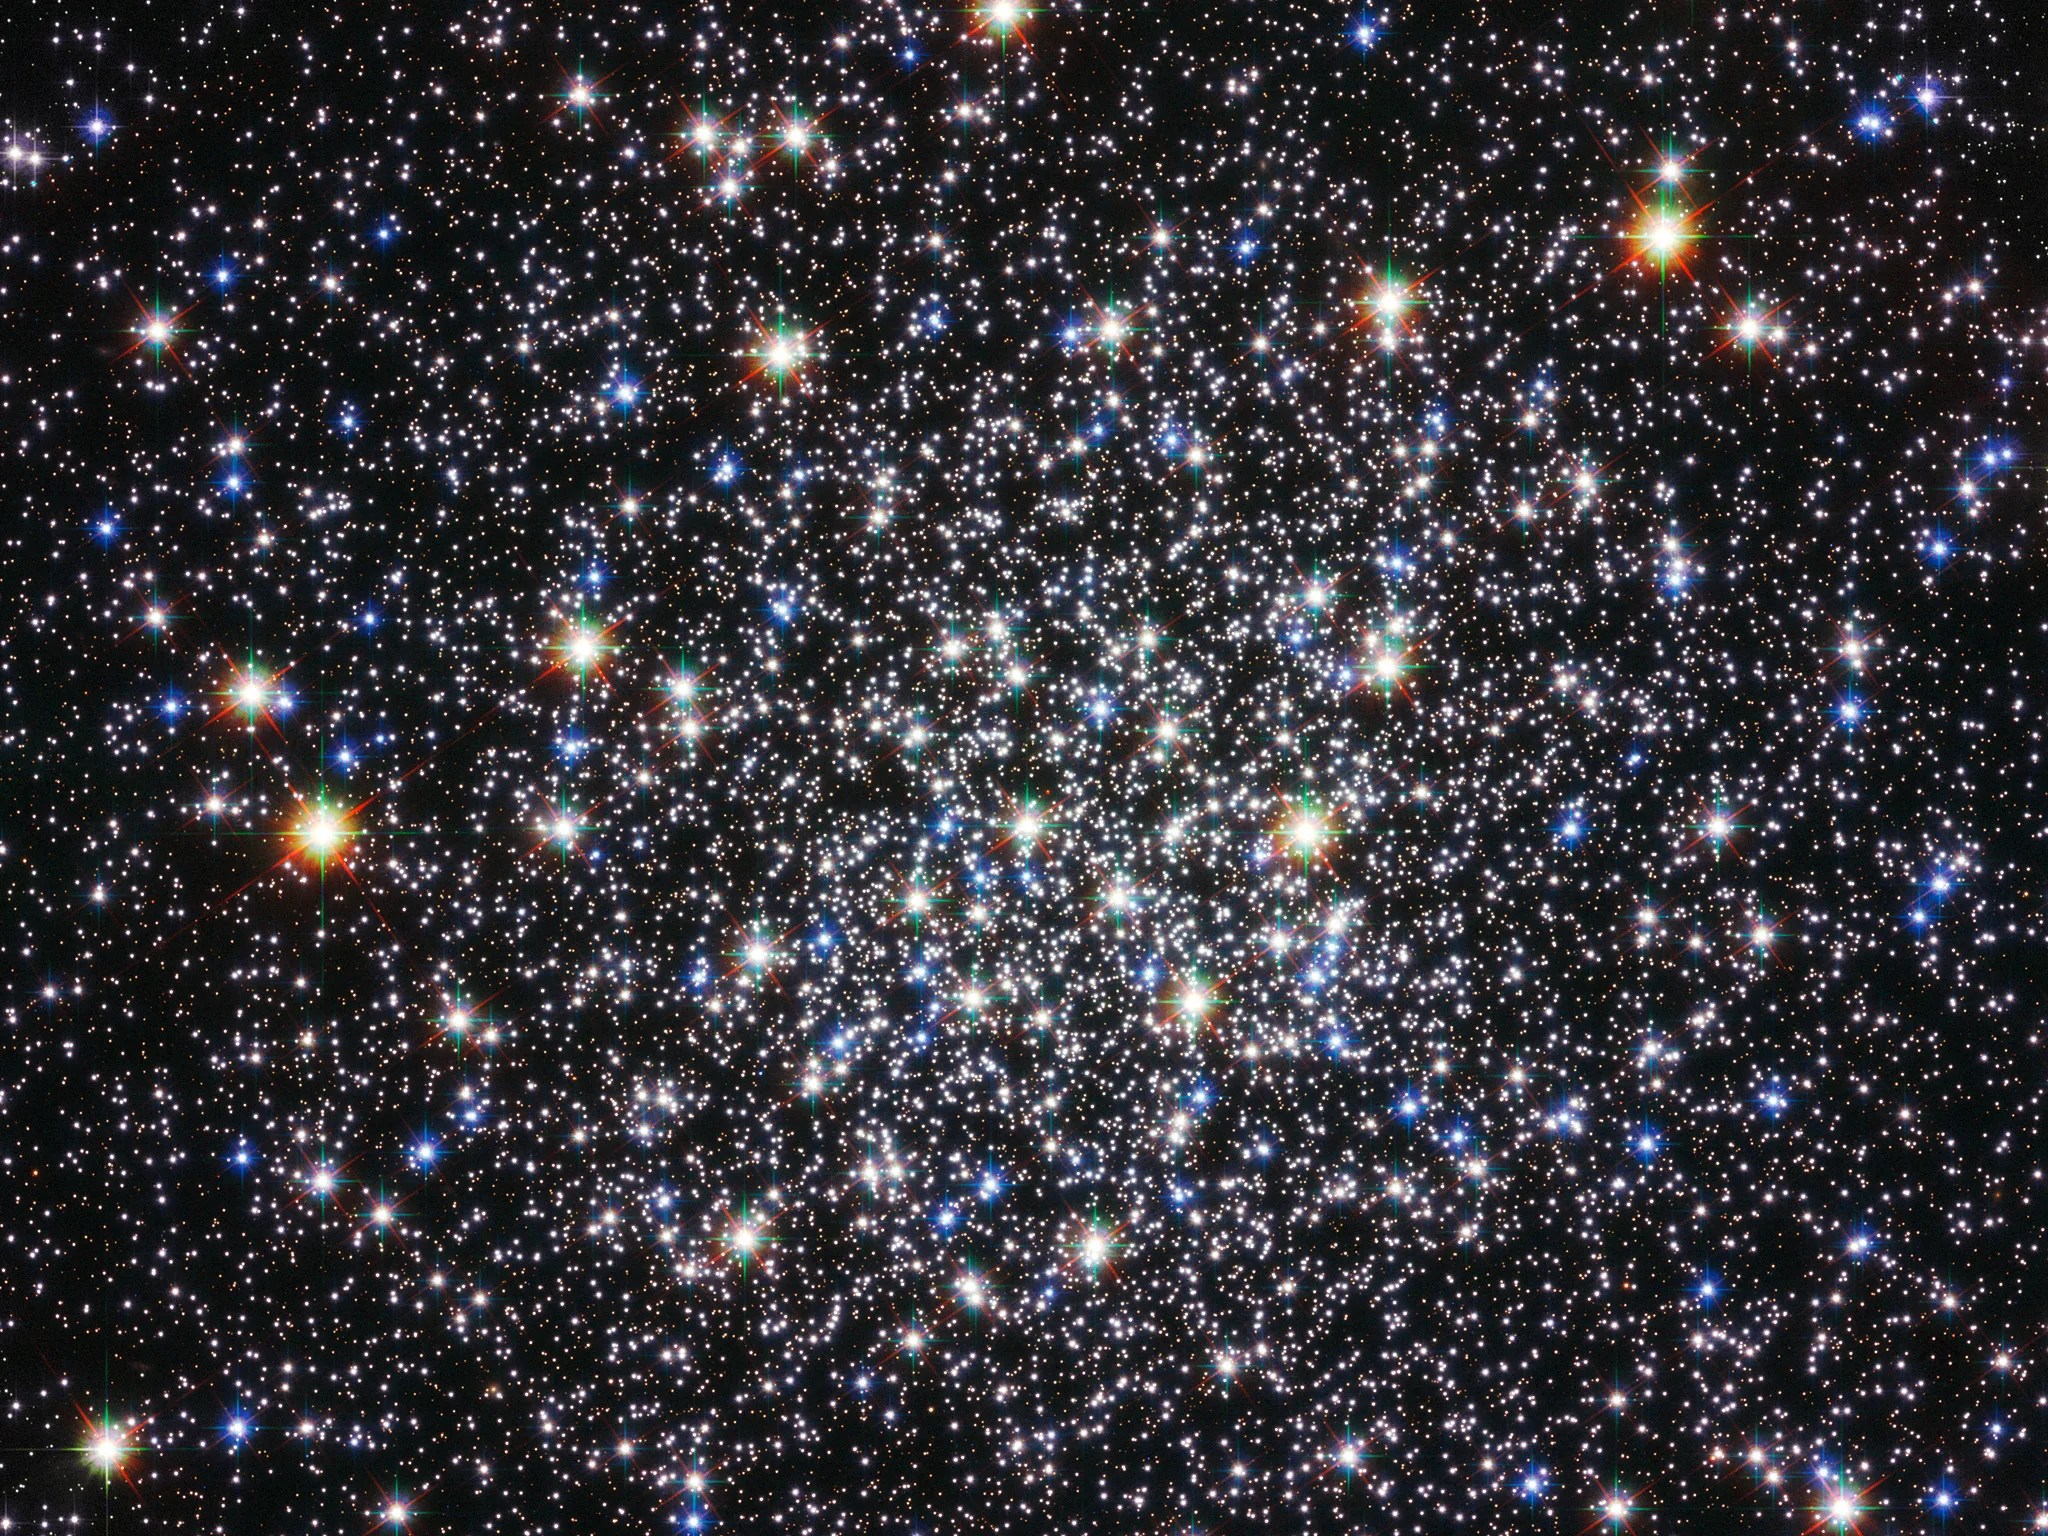 A globular cluster of thousands of white, blue, and larger yellow stars.